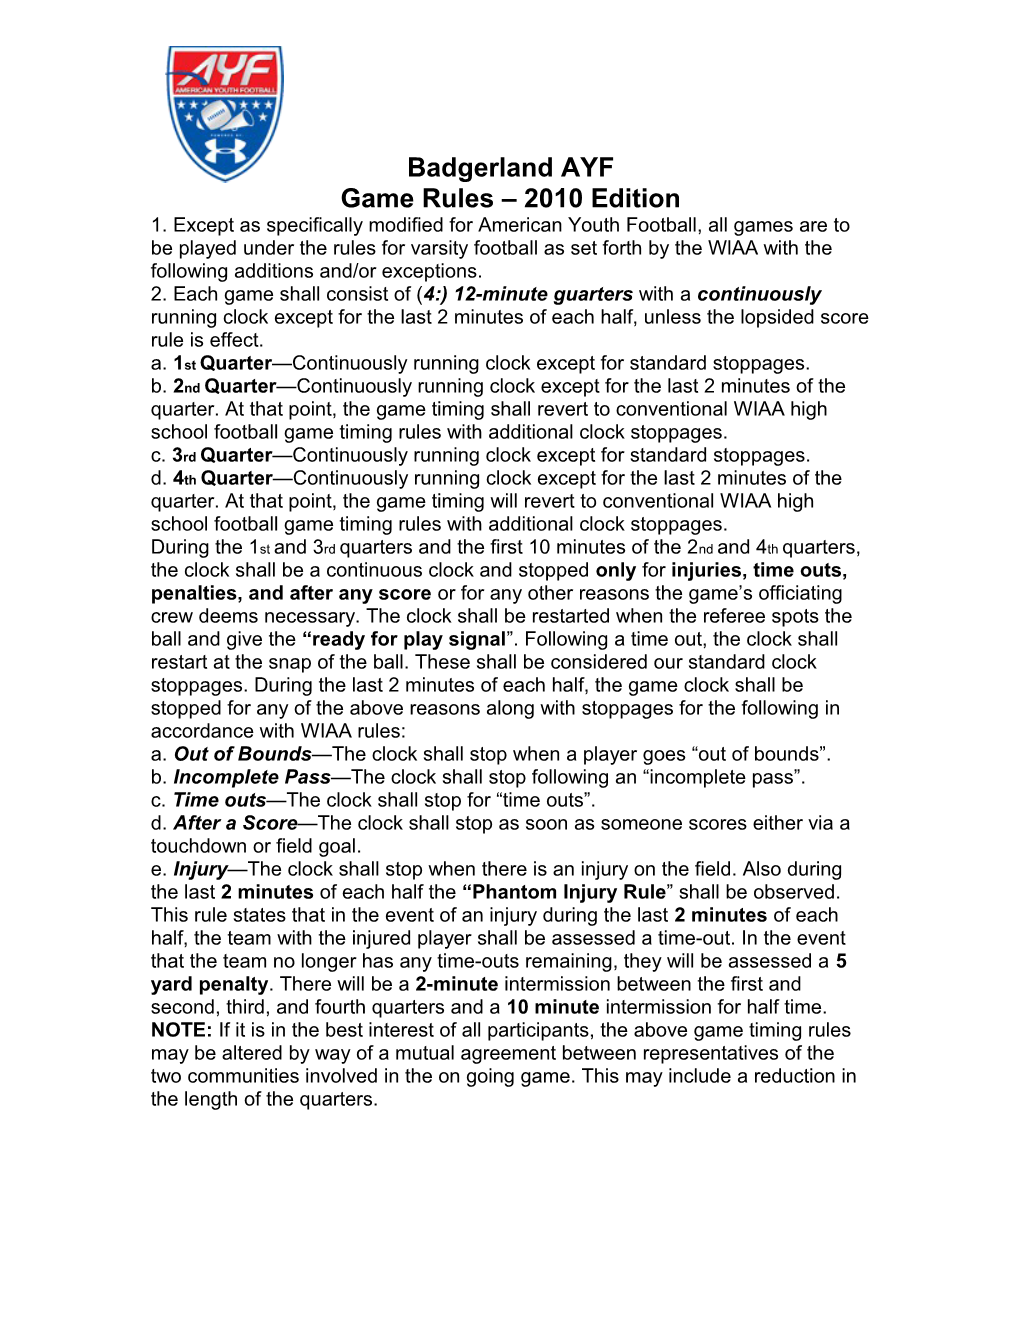 Game Rules 2010 Edition